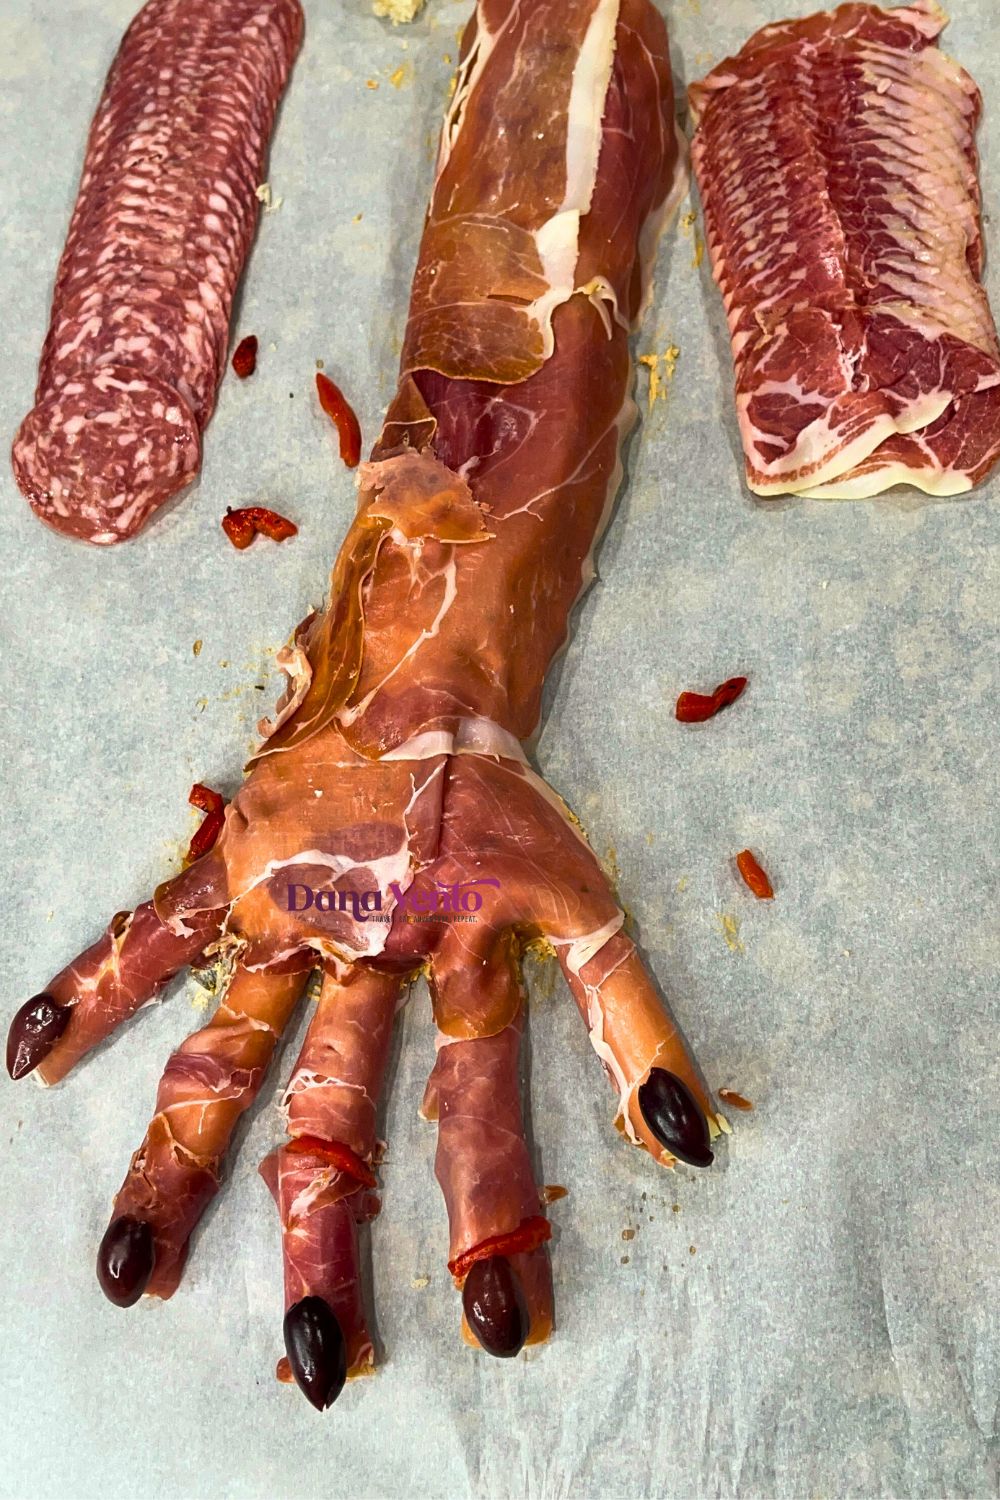 Edible amputated hand appetizer for Halloween with Kalamata nails and cuts of roasted red peppers for blood (Pinterest Carousel Ad)